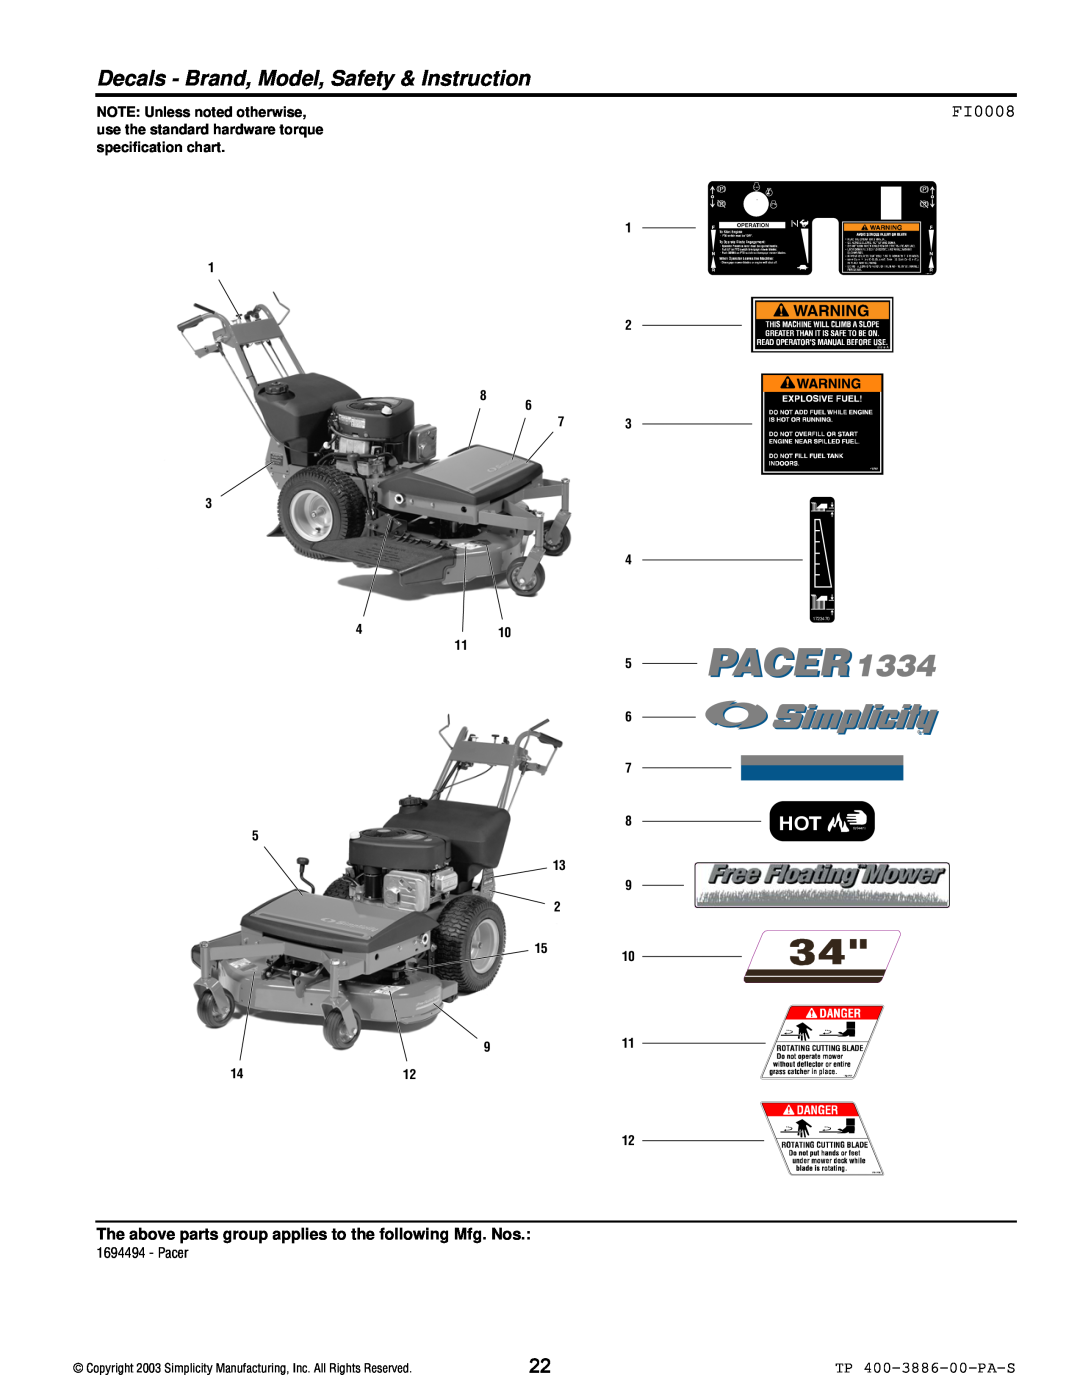 Simplicity Series Transaxle manual Decals - Brand, Model, Safety & Instruction, FI0008, TP 400-3886-00-PA-S, 5 6 